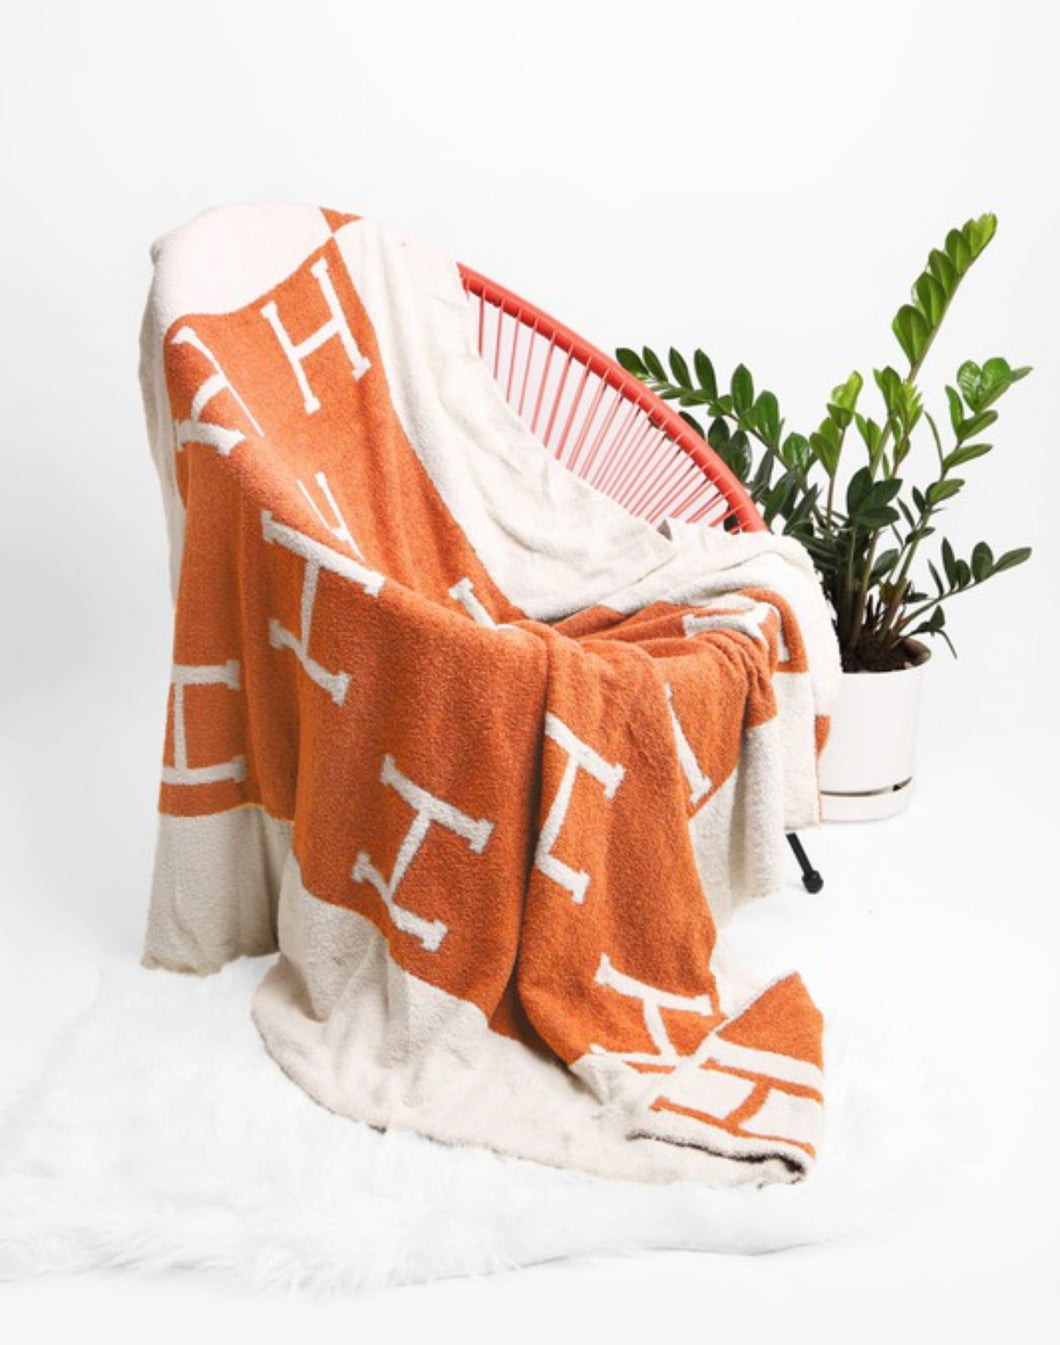 H Throw Blanket backordered Ships on or before 4/15